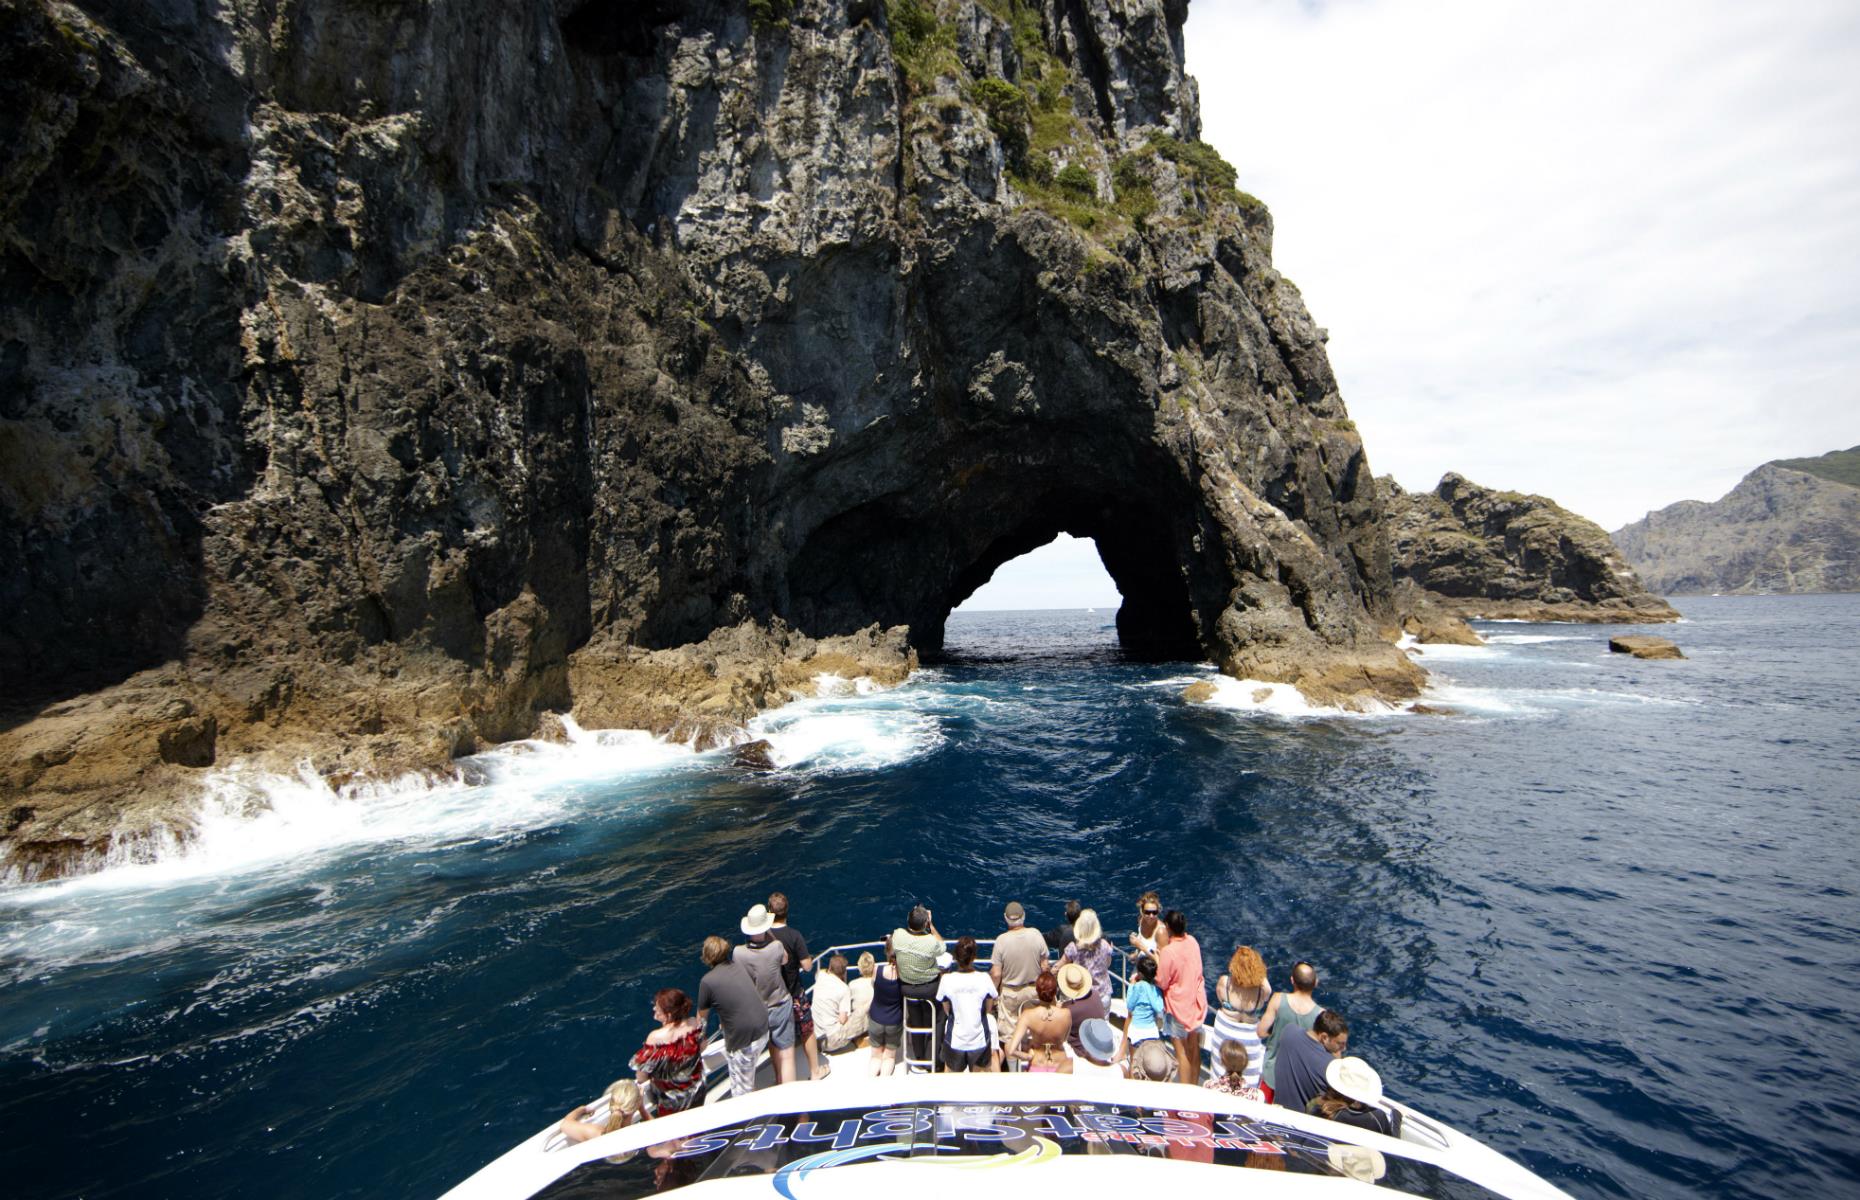 <p>The Bay of Islands is a watery wonderland with more than 100 offshore subtropical islands to explore. The talisman of the region is the Hole in the Rock (Piercy Island) – a spectacular rock formation that is possible to cruise right through on a calm day. <a href="https://www.intercity.co.nz/flexipass-hole-in-the-rock-cruise">Half-day tours</a> leave from Paihia.</p>